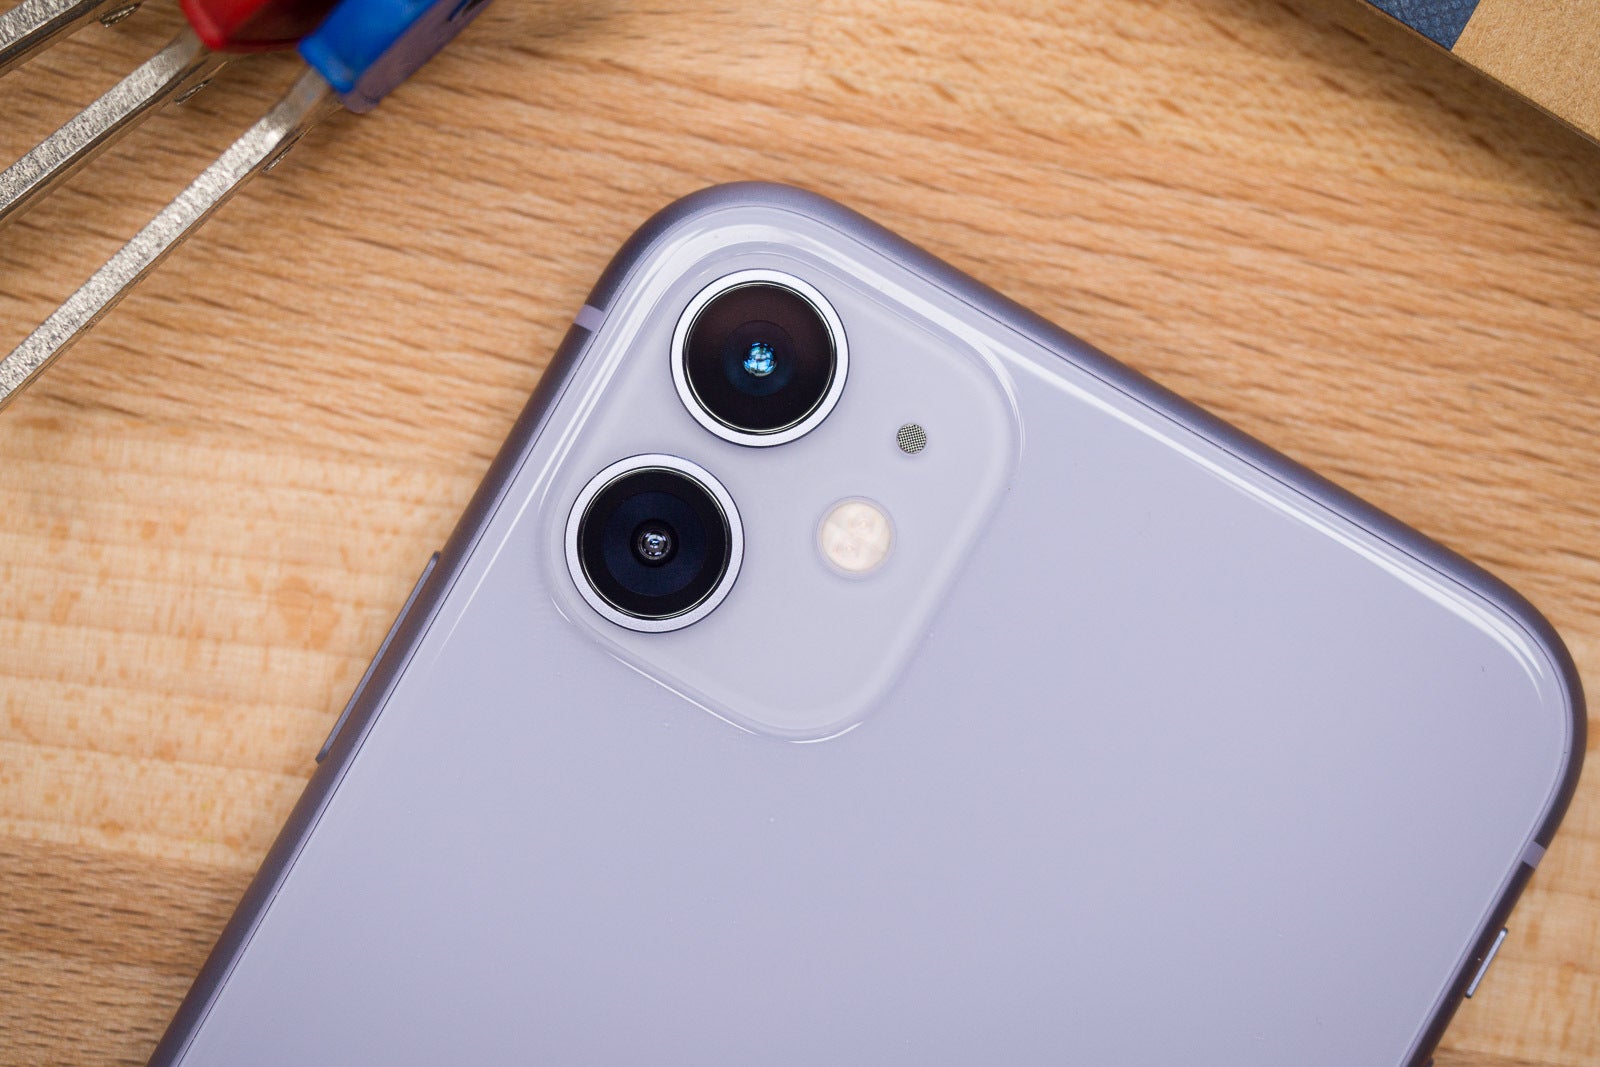 The iPhone 11's performing so well it's almost beating Apple's expectations